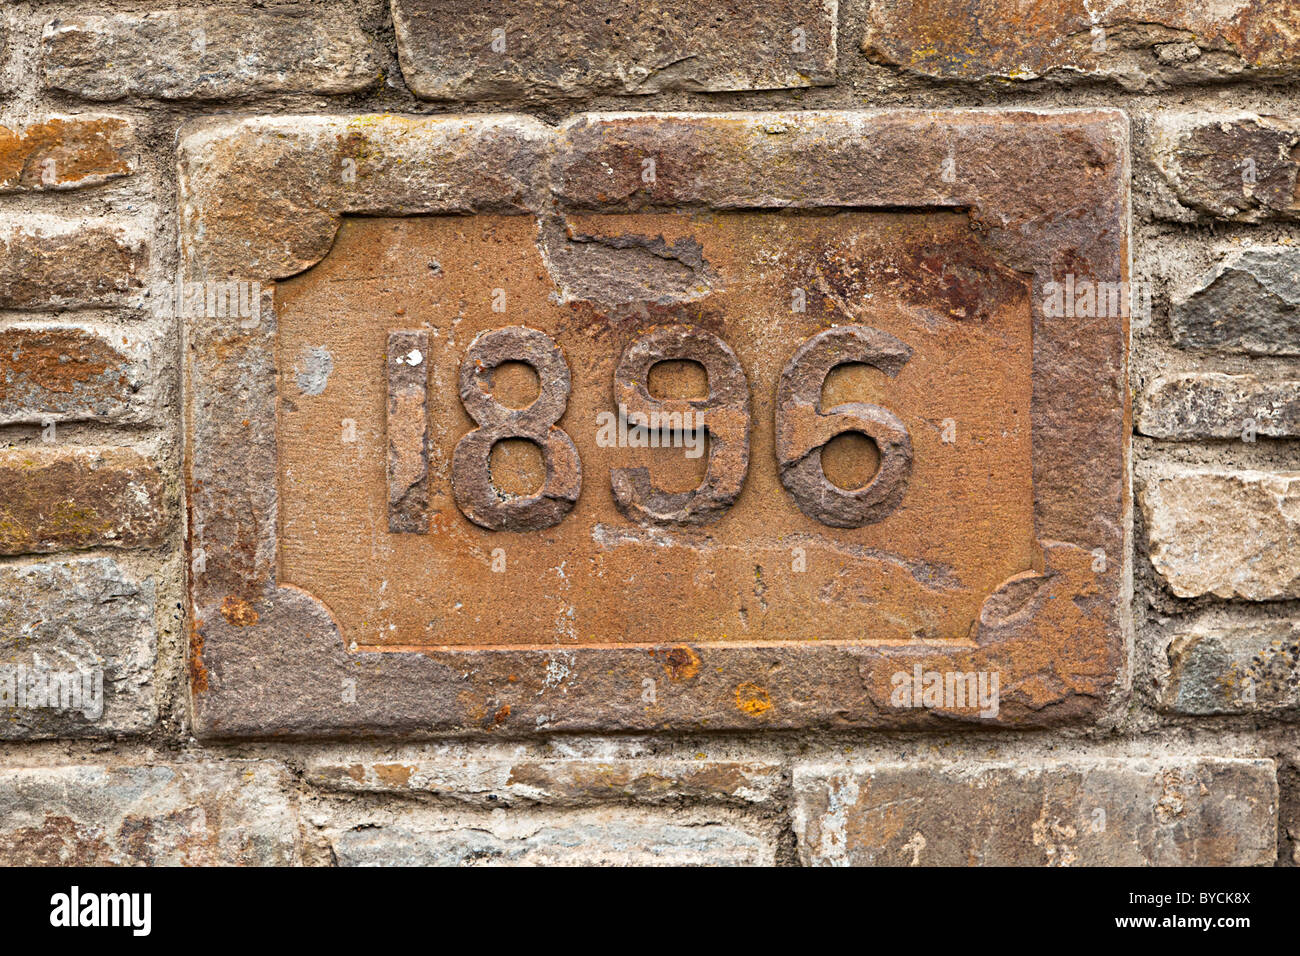 Date of 1986 in stone wall at the site of Six Bells colliery Blaenau Gwent Wales UK Stock Photo